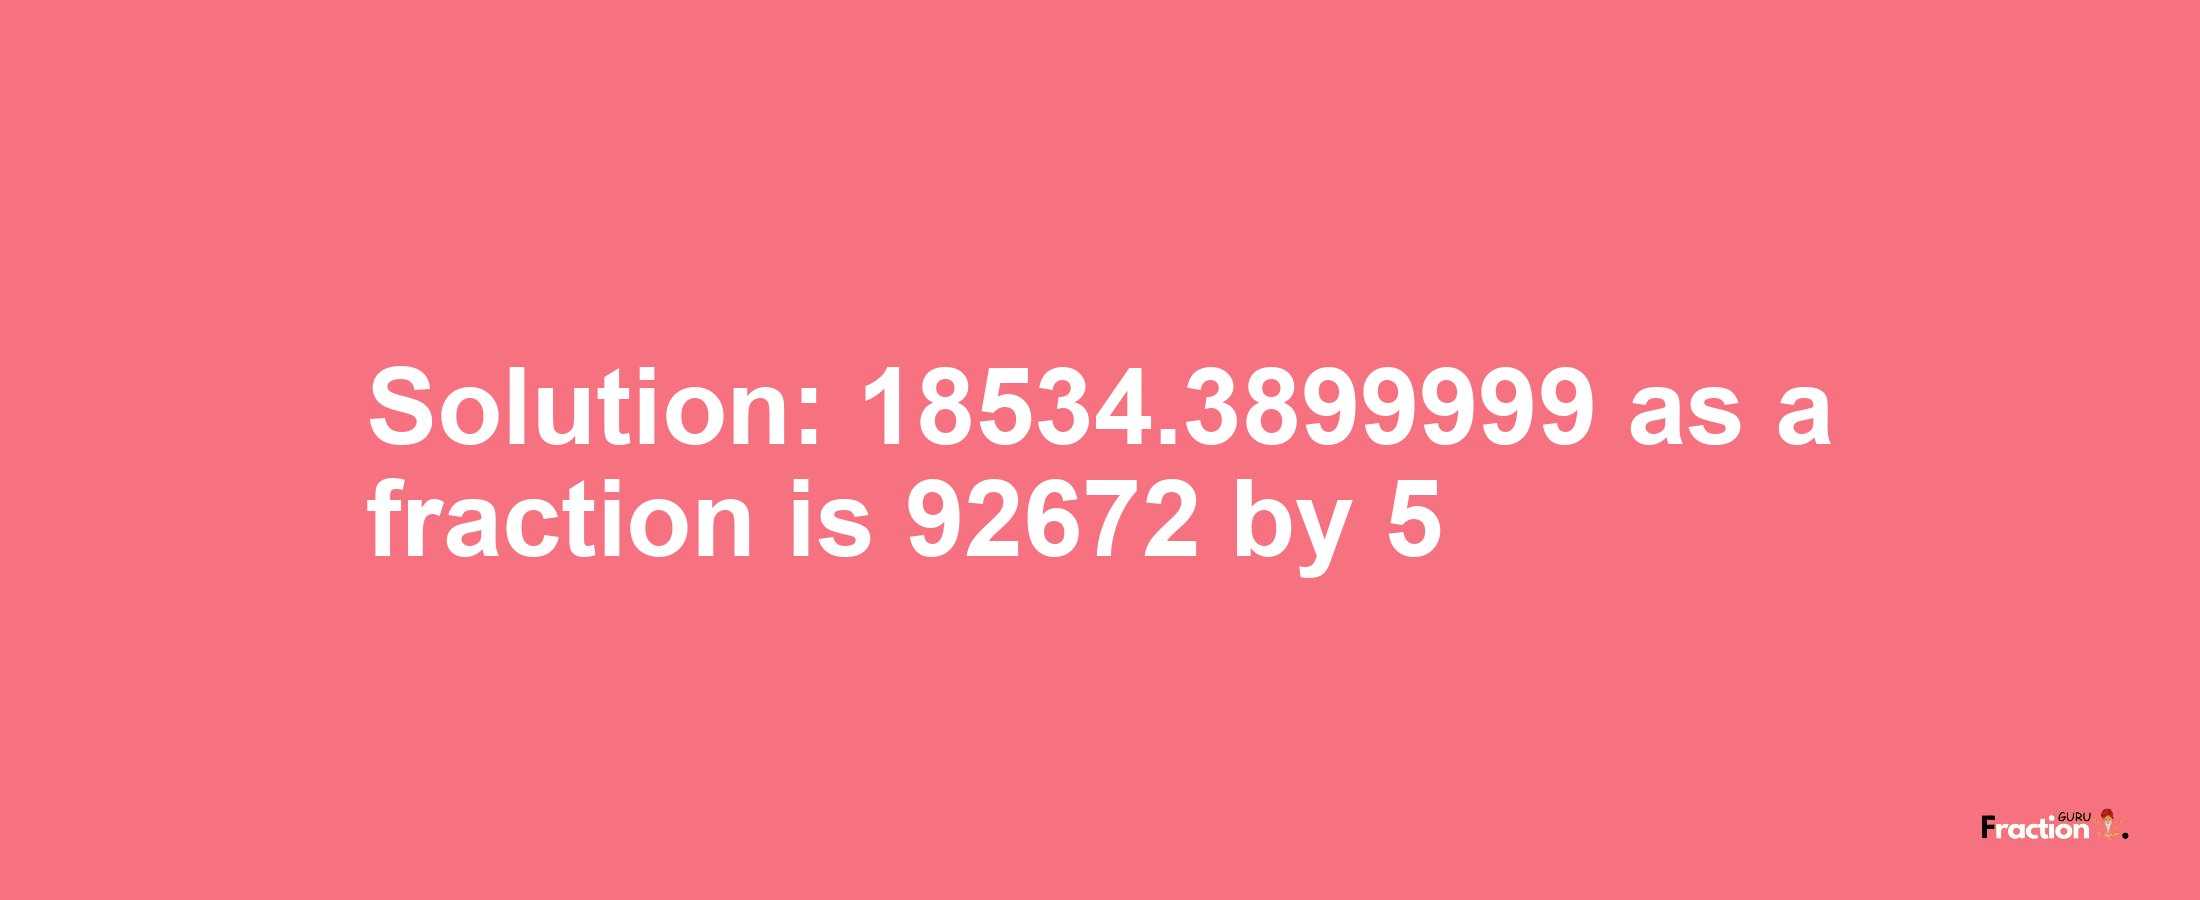 Solution:18534.3899999 as a fraction is 92672/5